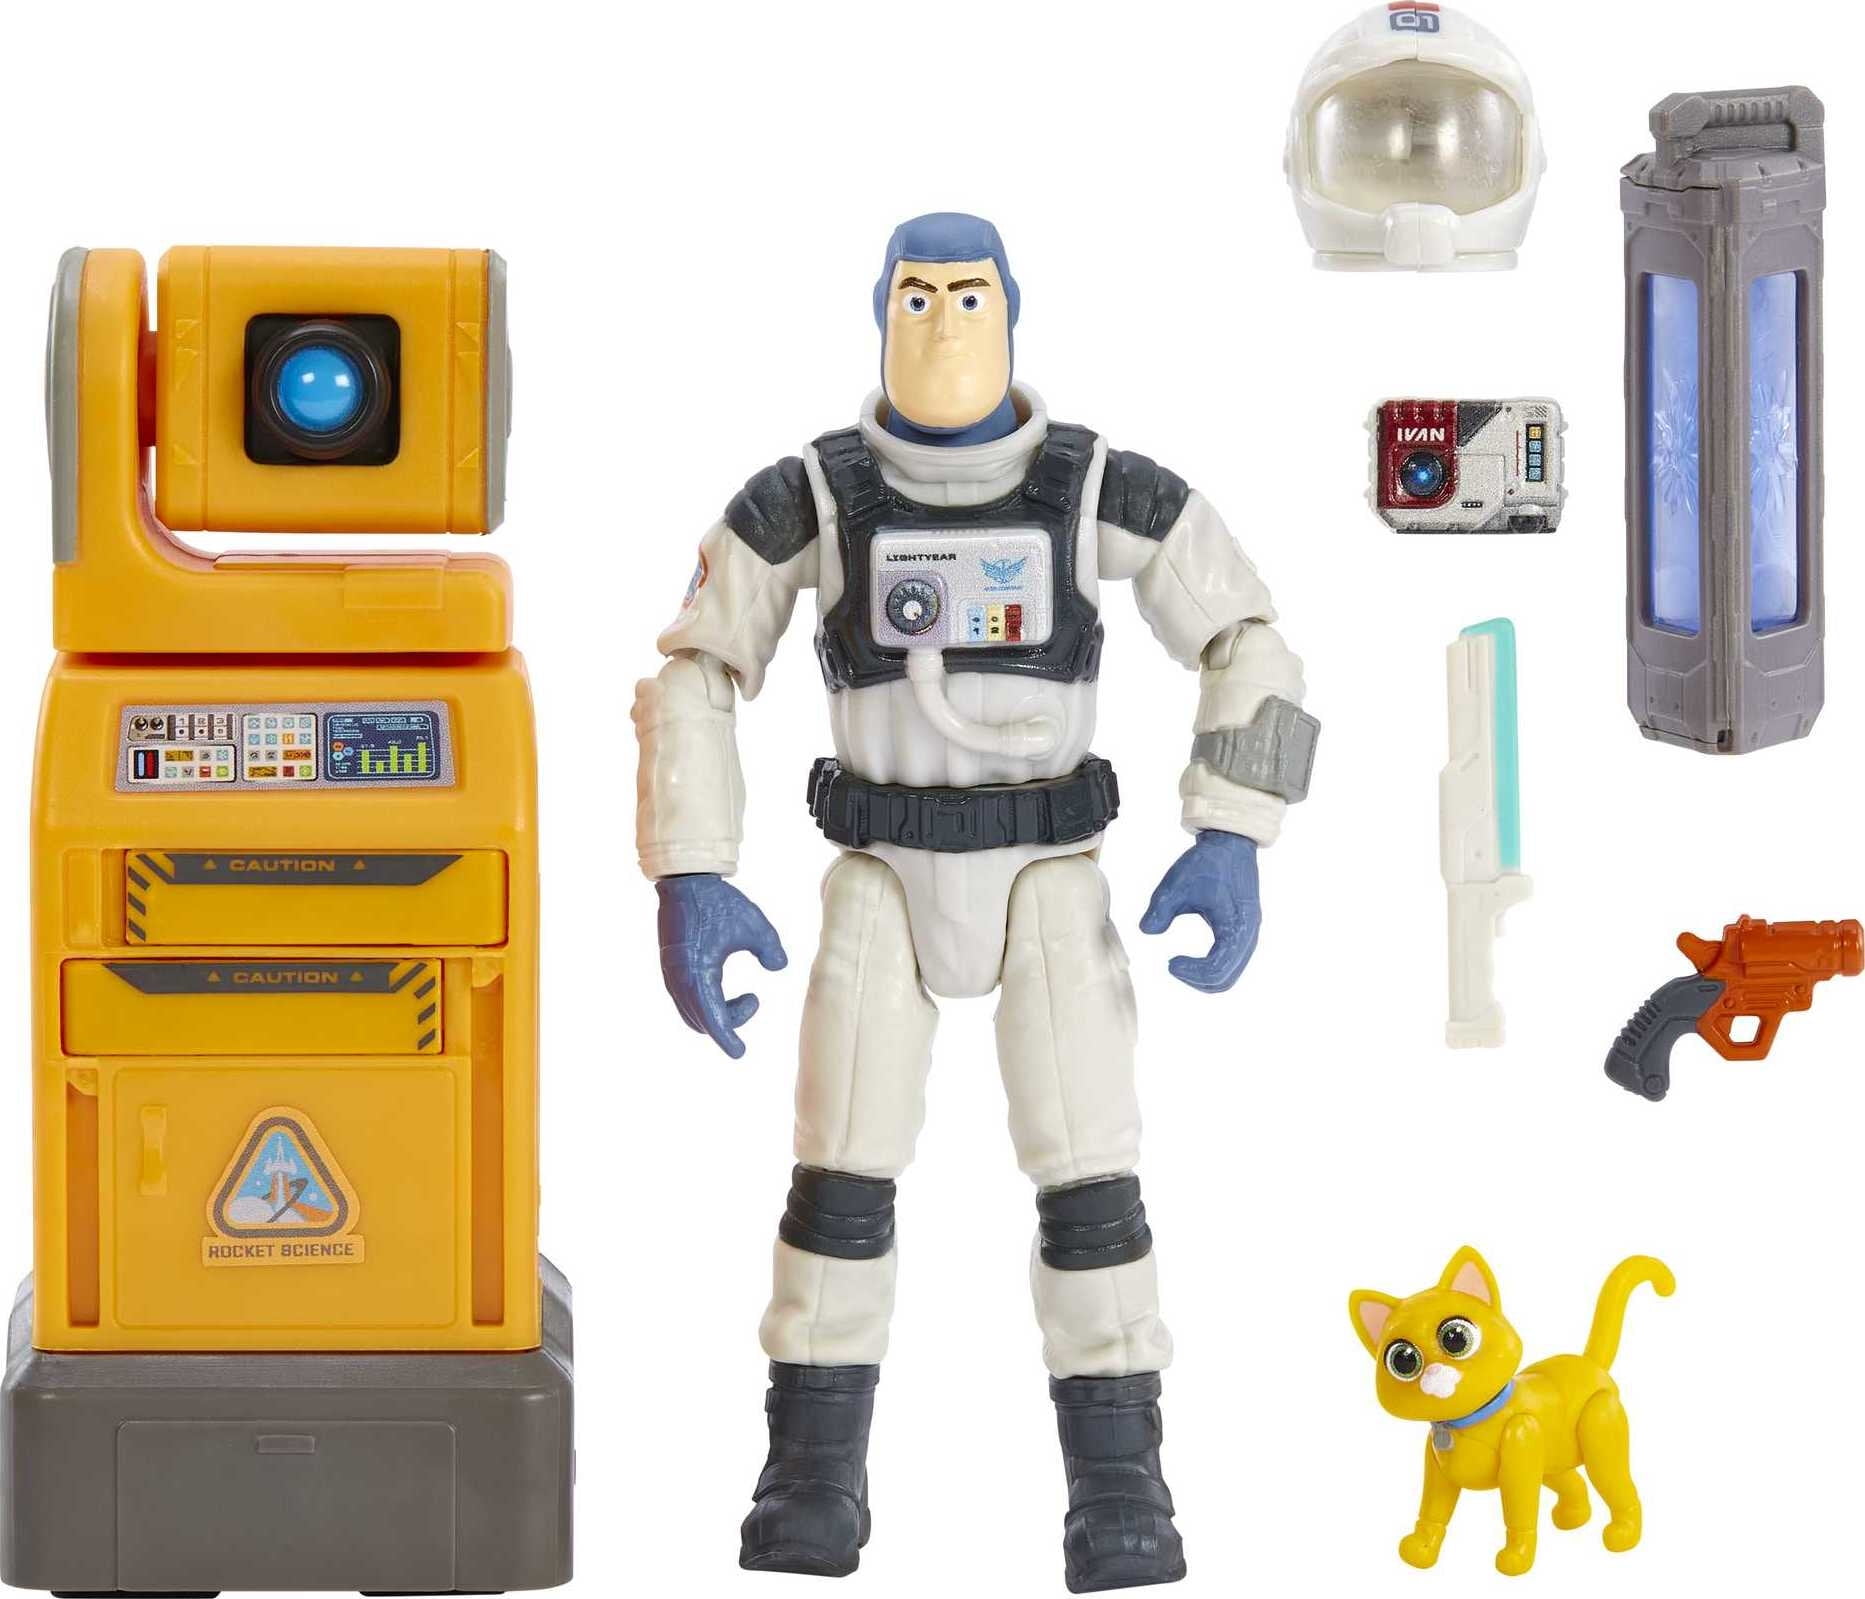 Disney and Pixar Lightyear Crystal Grade Launch-Ready Buzz, Eric & Sox Figures & Accessories, 5-in